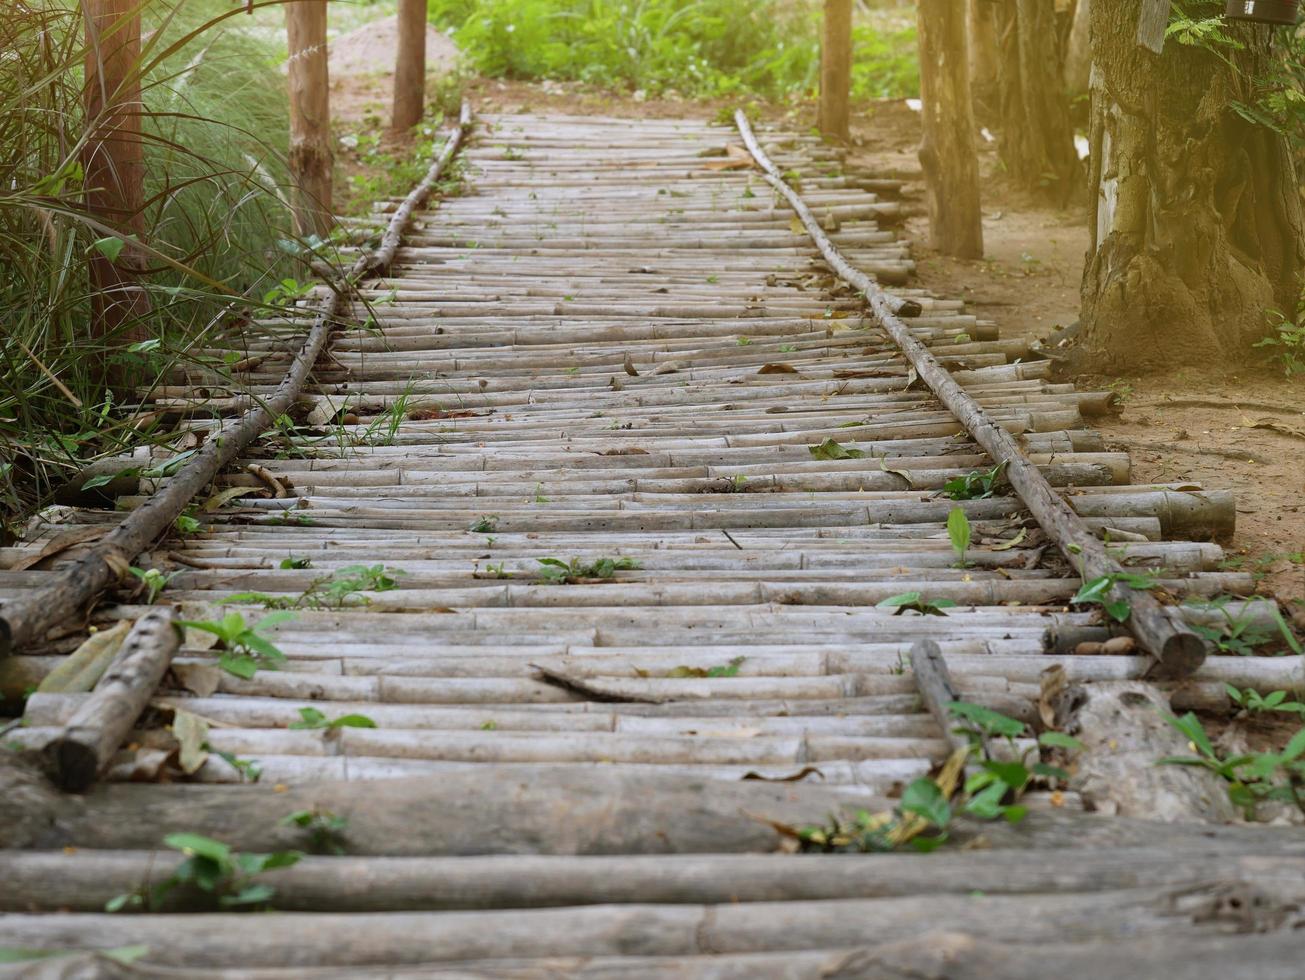 The pedestrian walkway is made of bamboo trunks lined up. photo